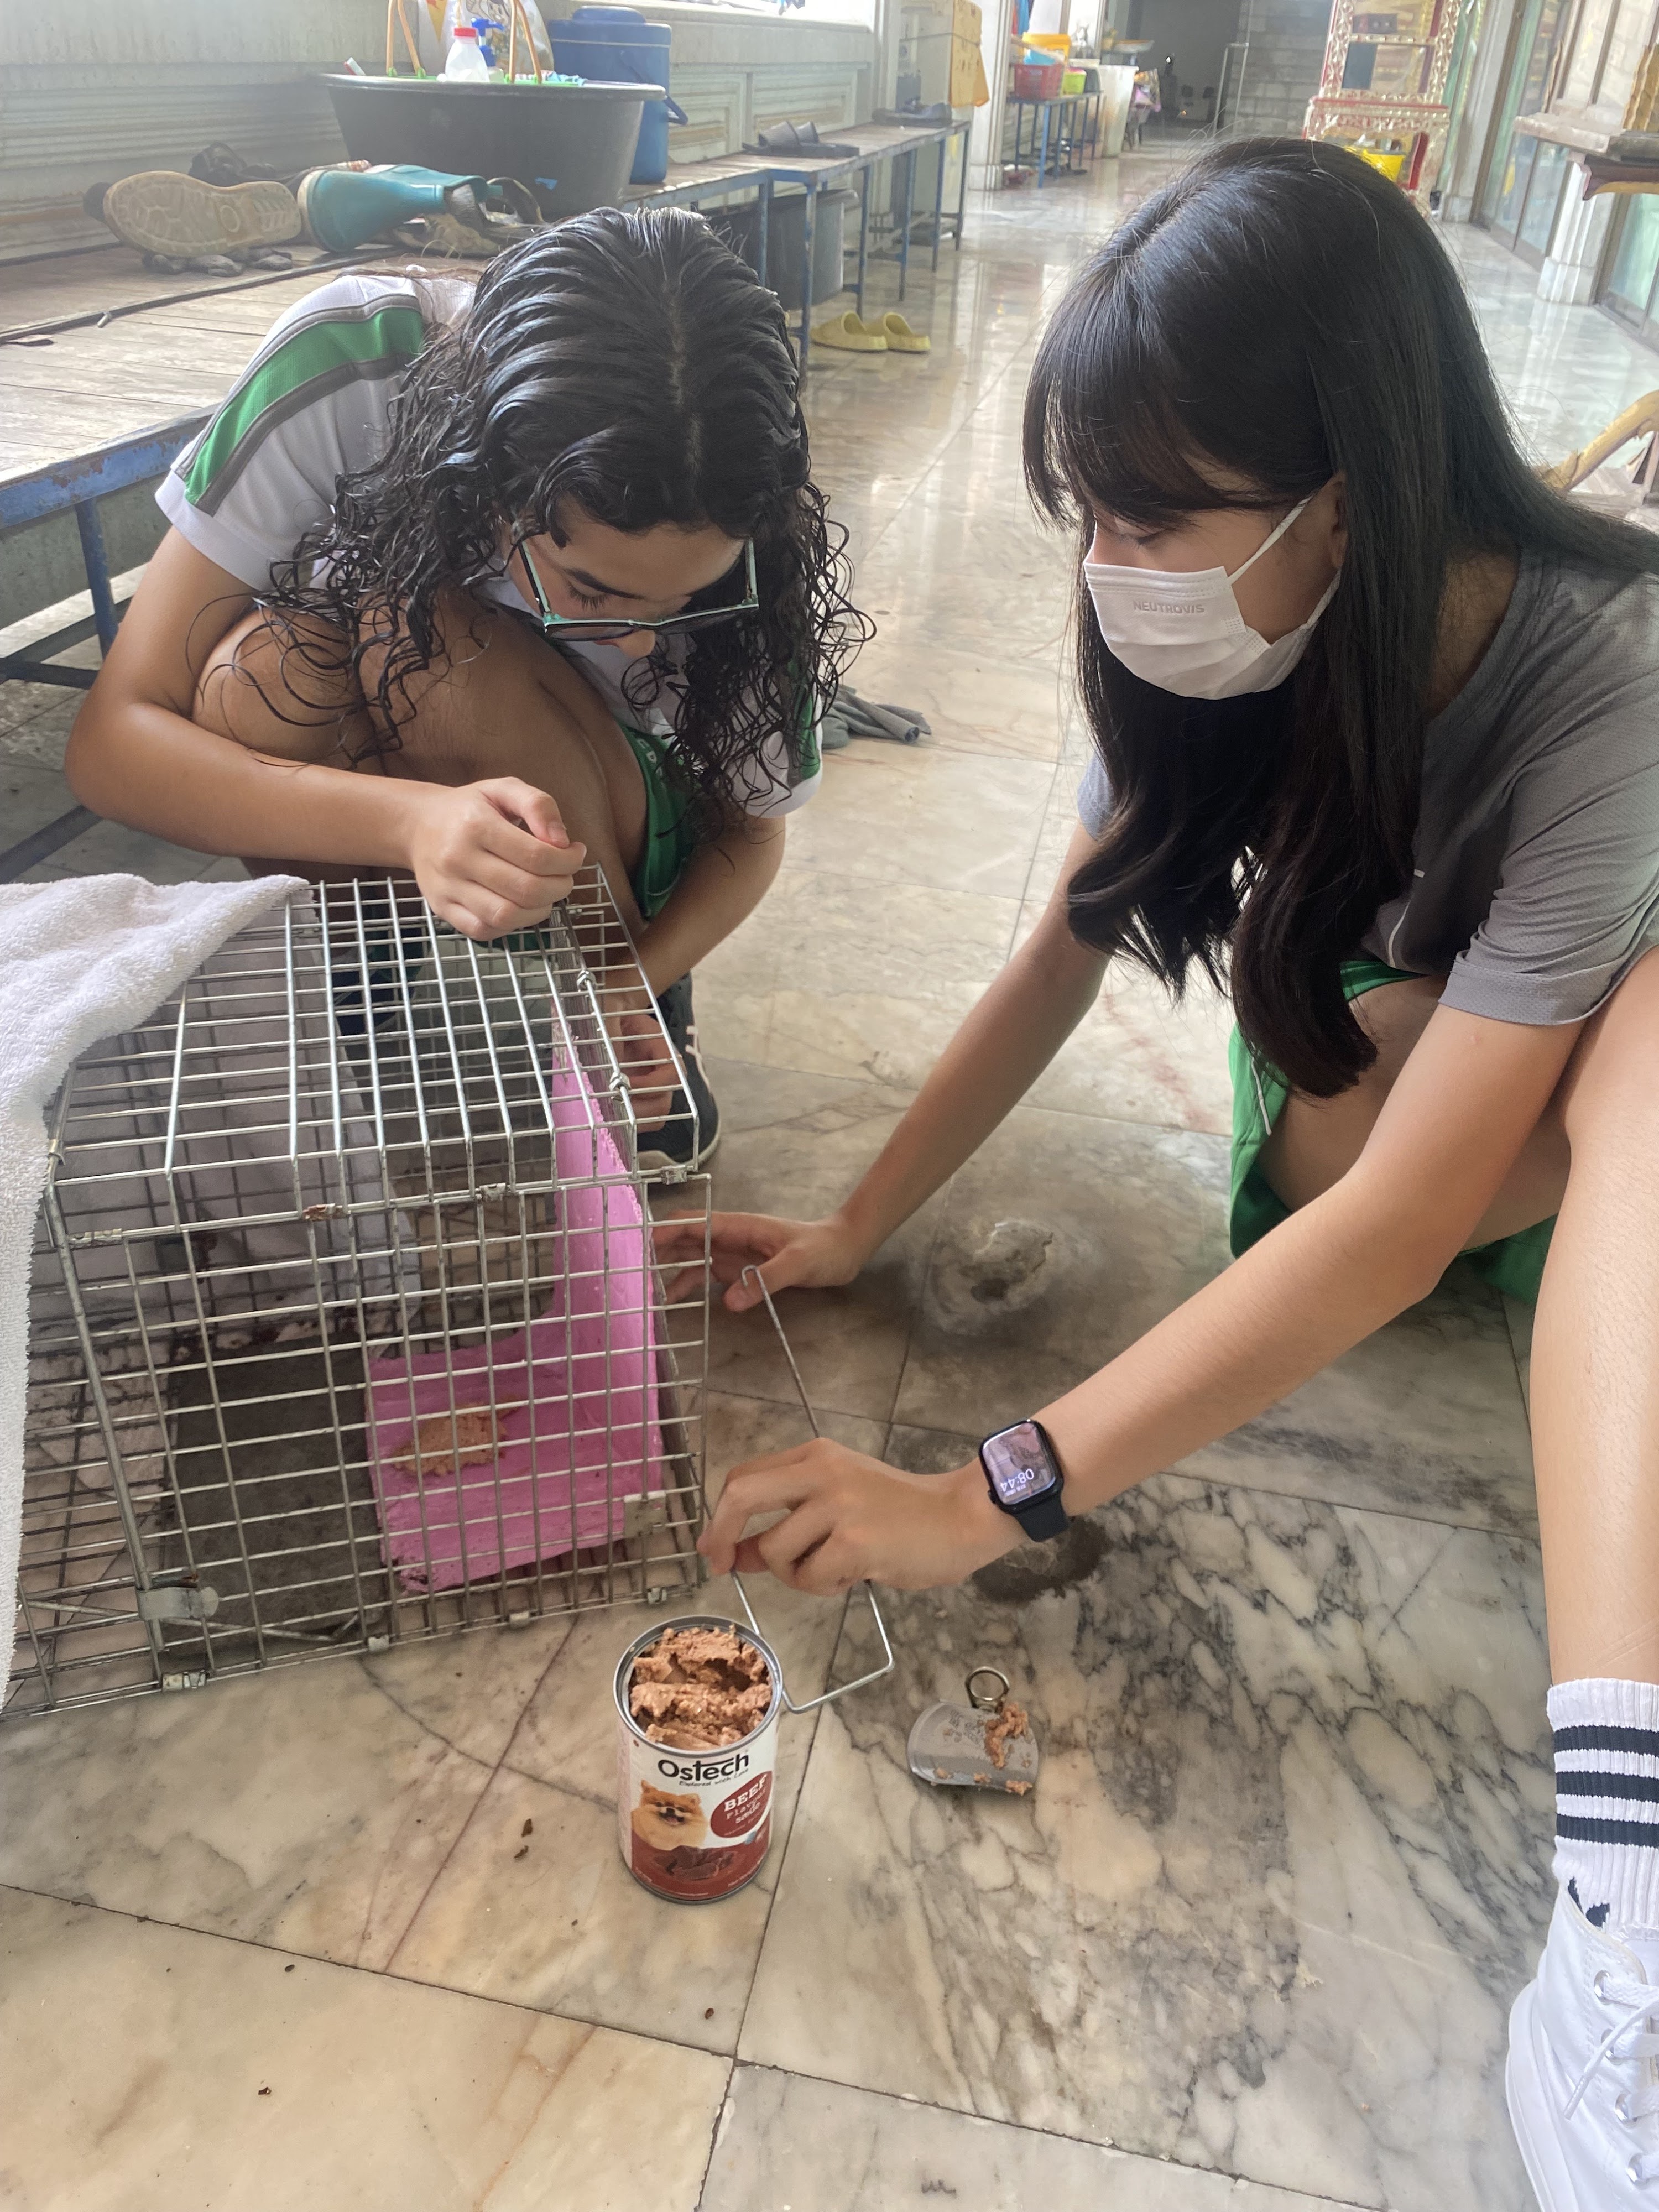 Discovering Bangkok's Stray Animal Control: Learners' Insight